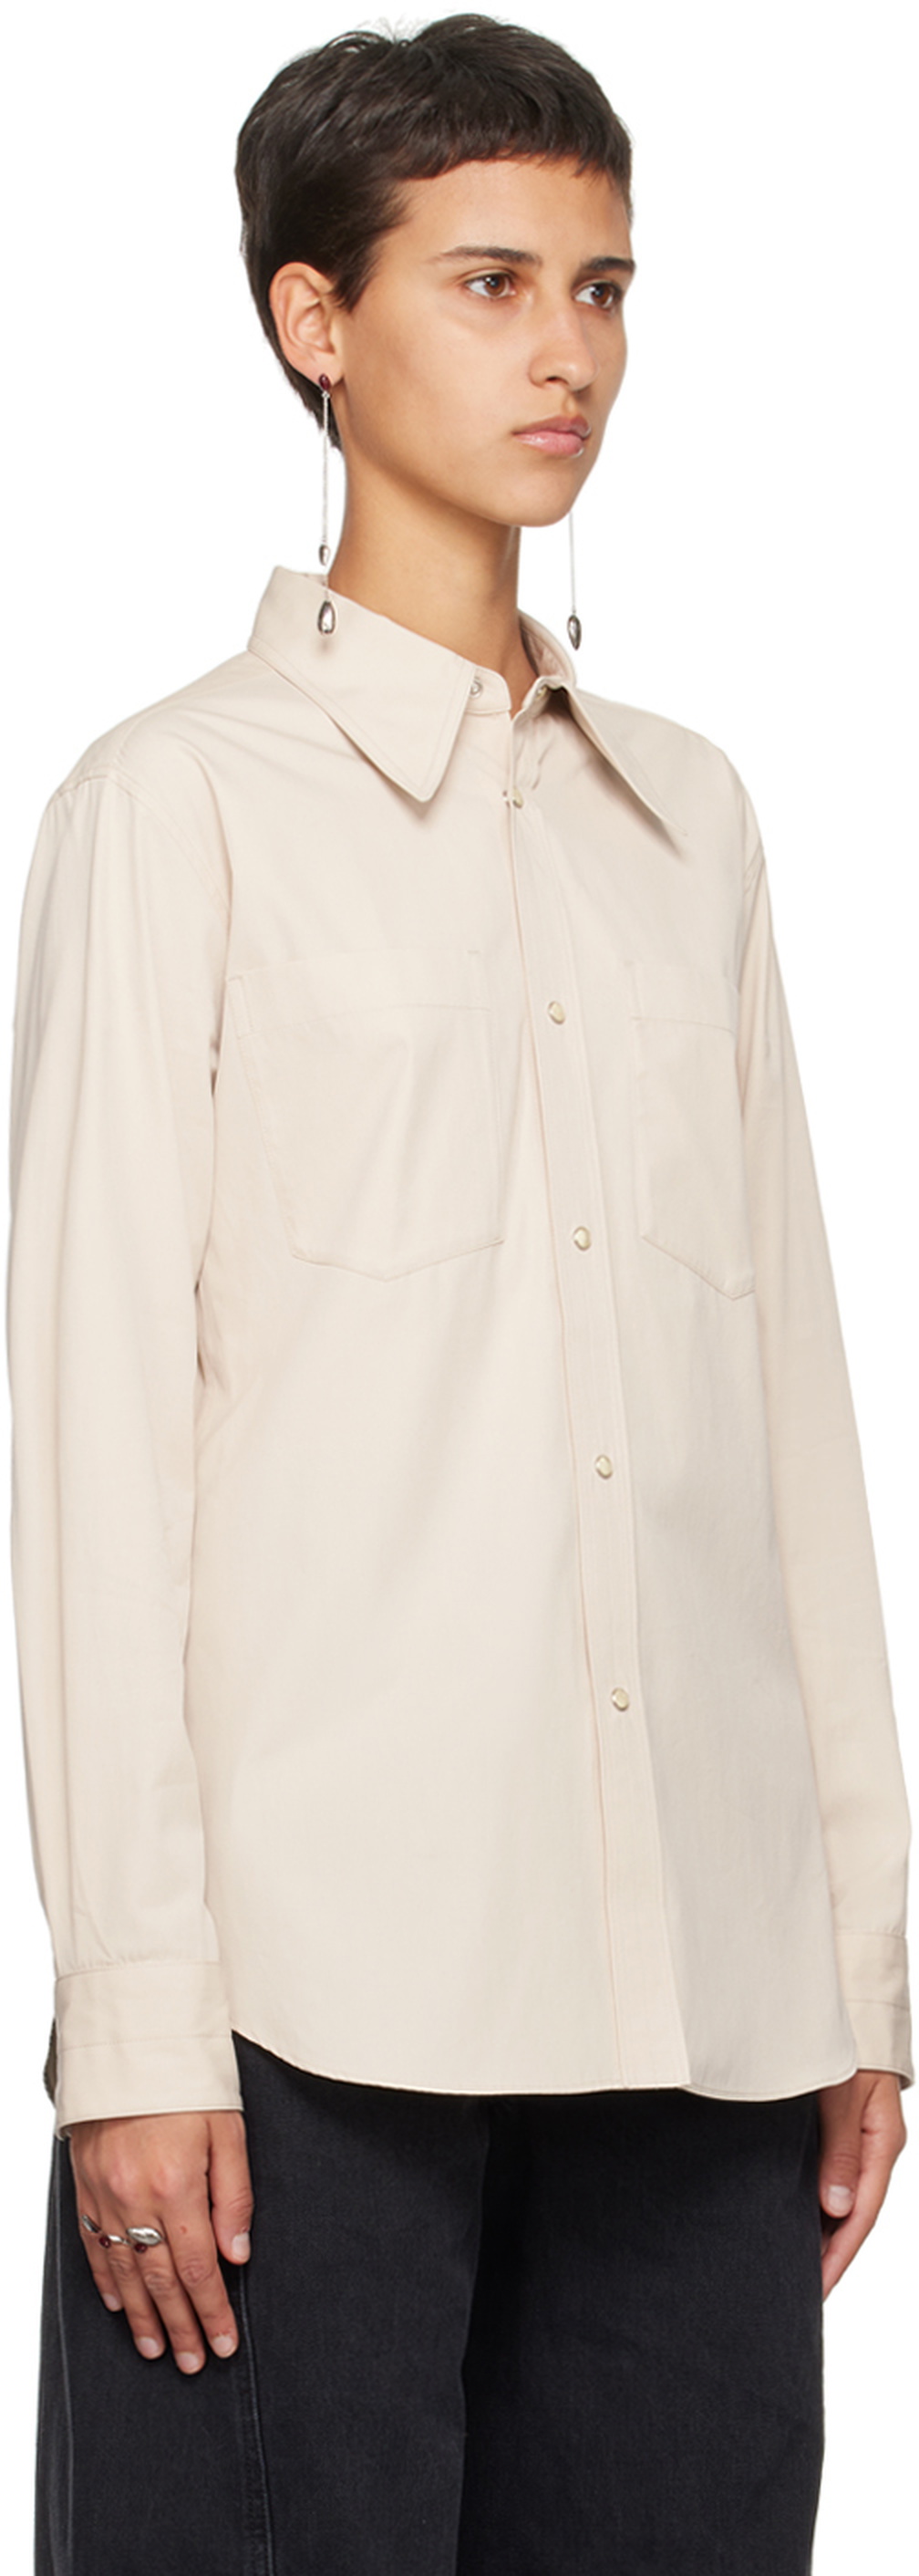 LEMAIRE Beige Pointed Collar Shirt Lemaire